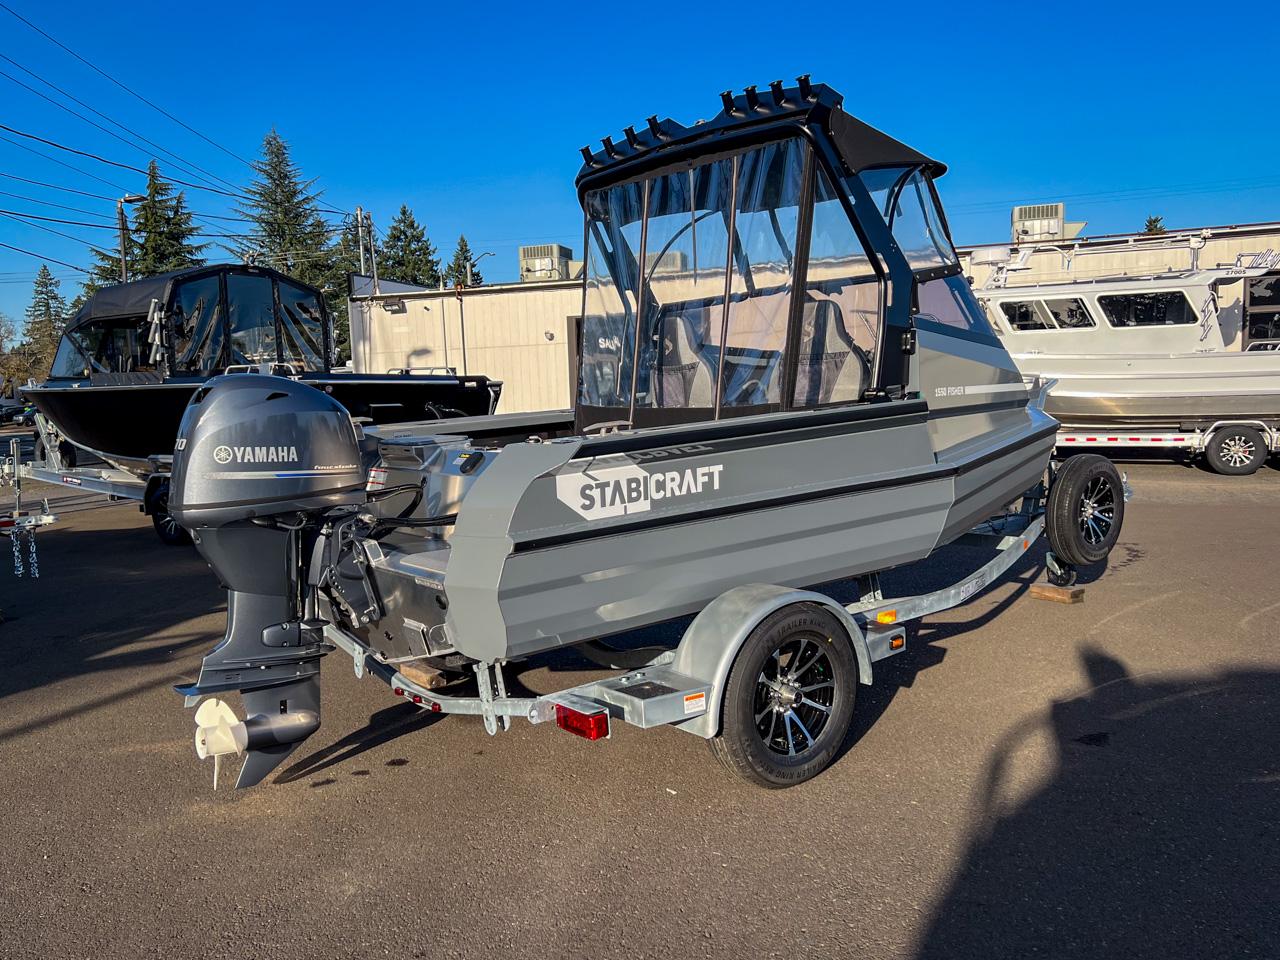 2023 Stabicraft 1550 Fisher